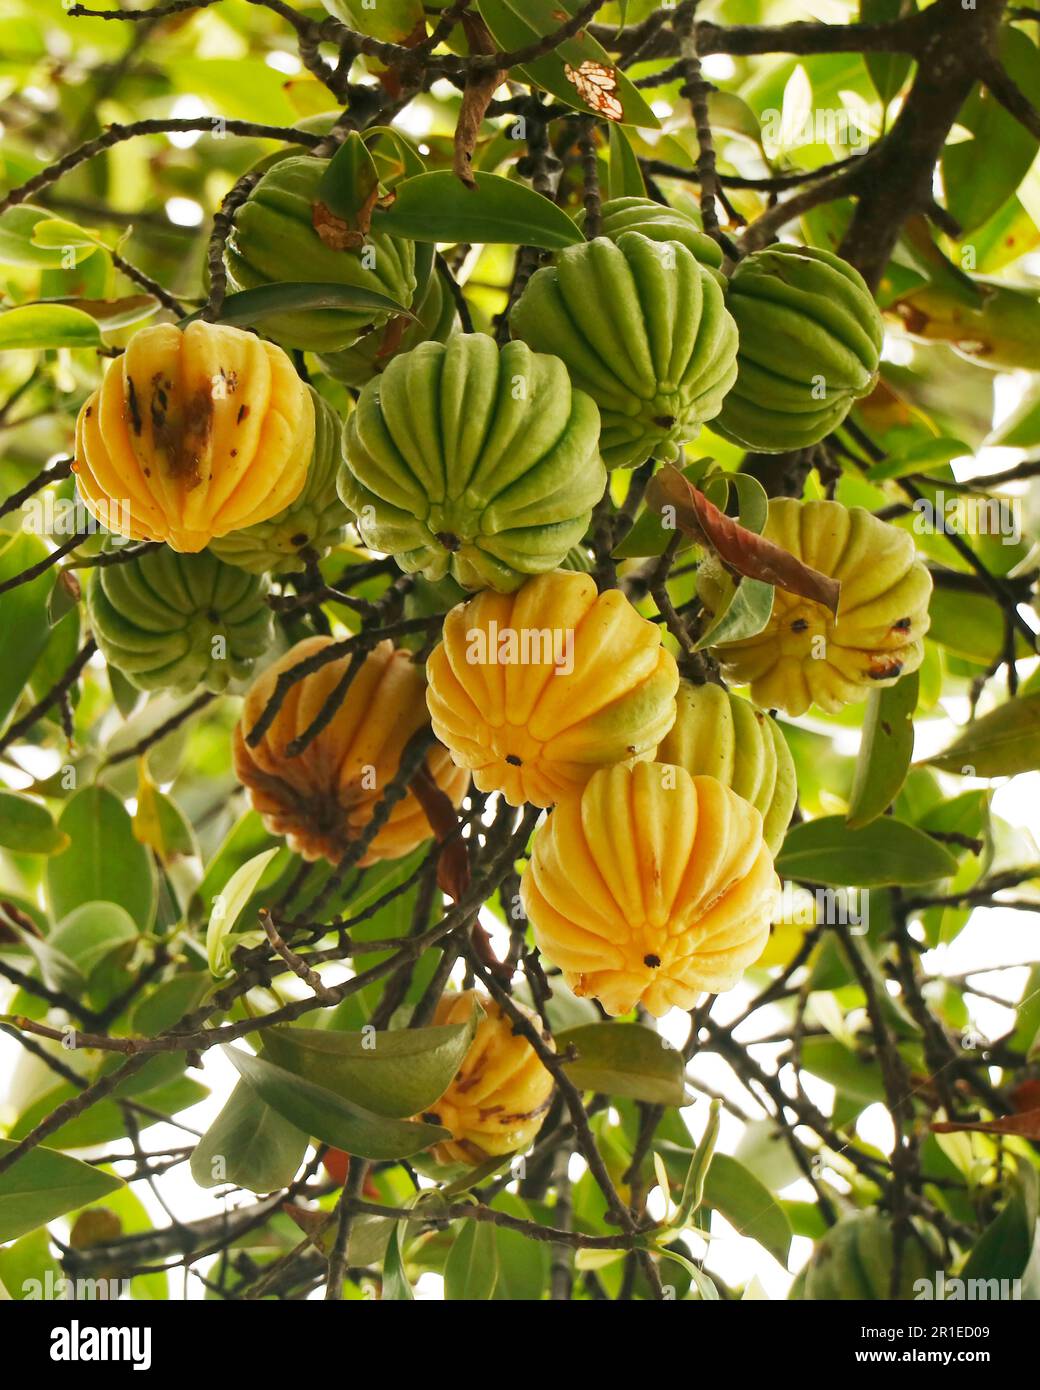 Garcinia gummi-gutta is a tropical species of Garcinia native to Southeast Asia.names include Garcinia cambogia, as well as brindle berry, and Malabar Stock Photo